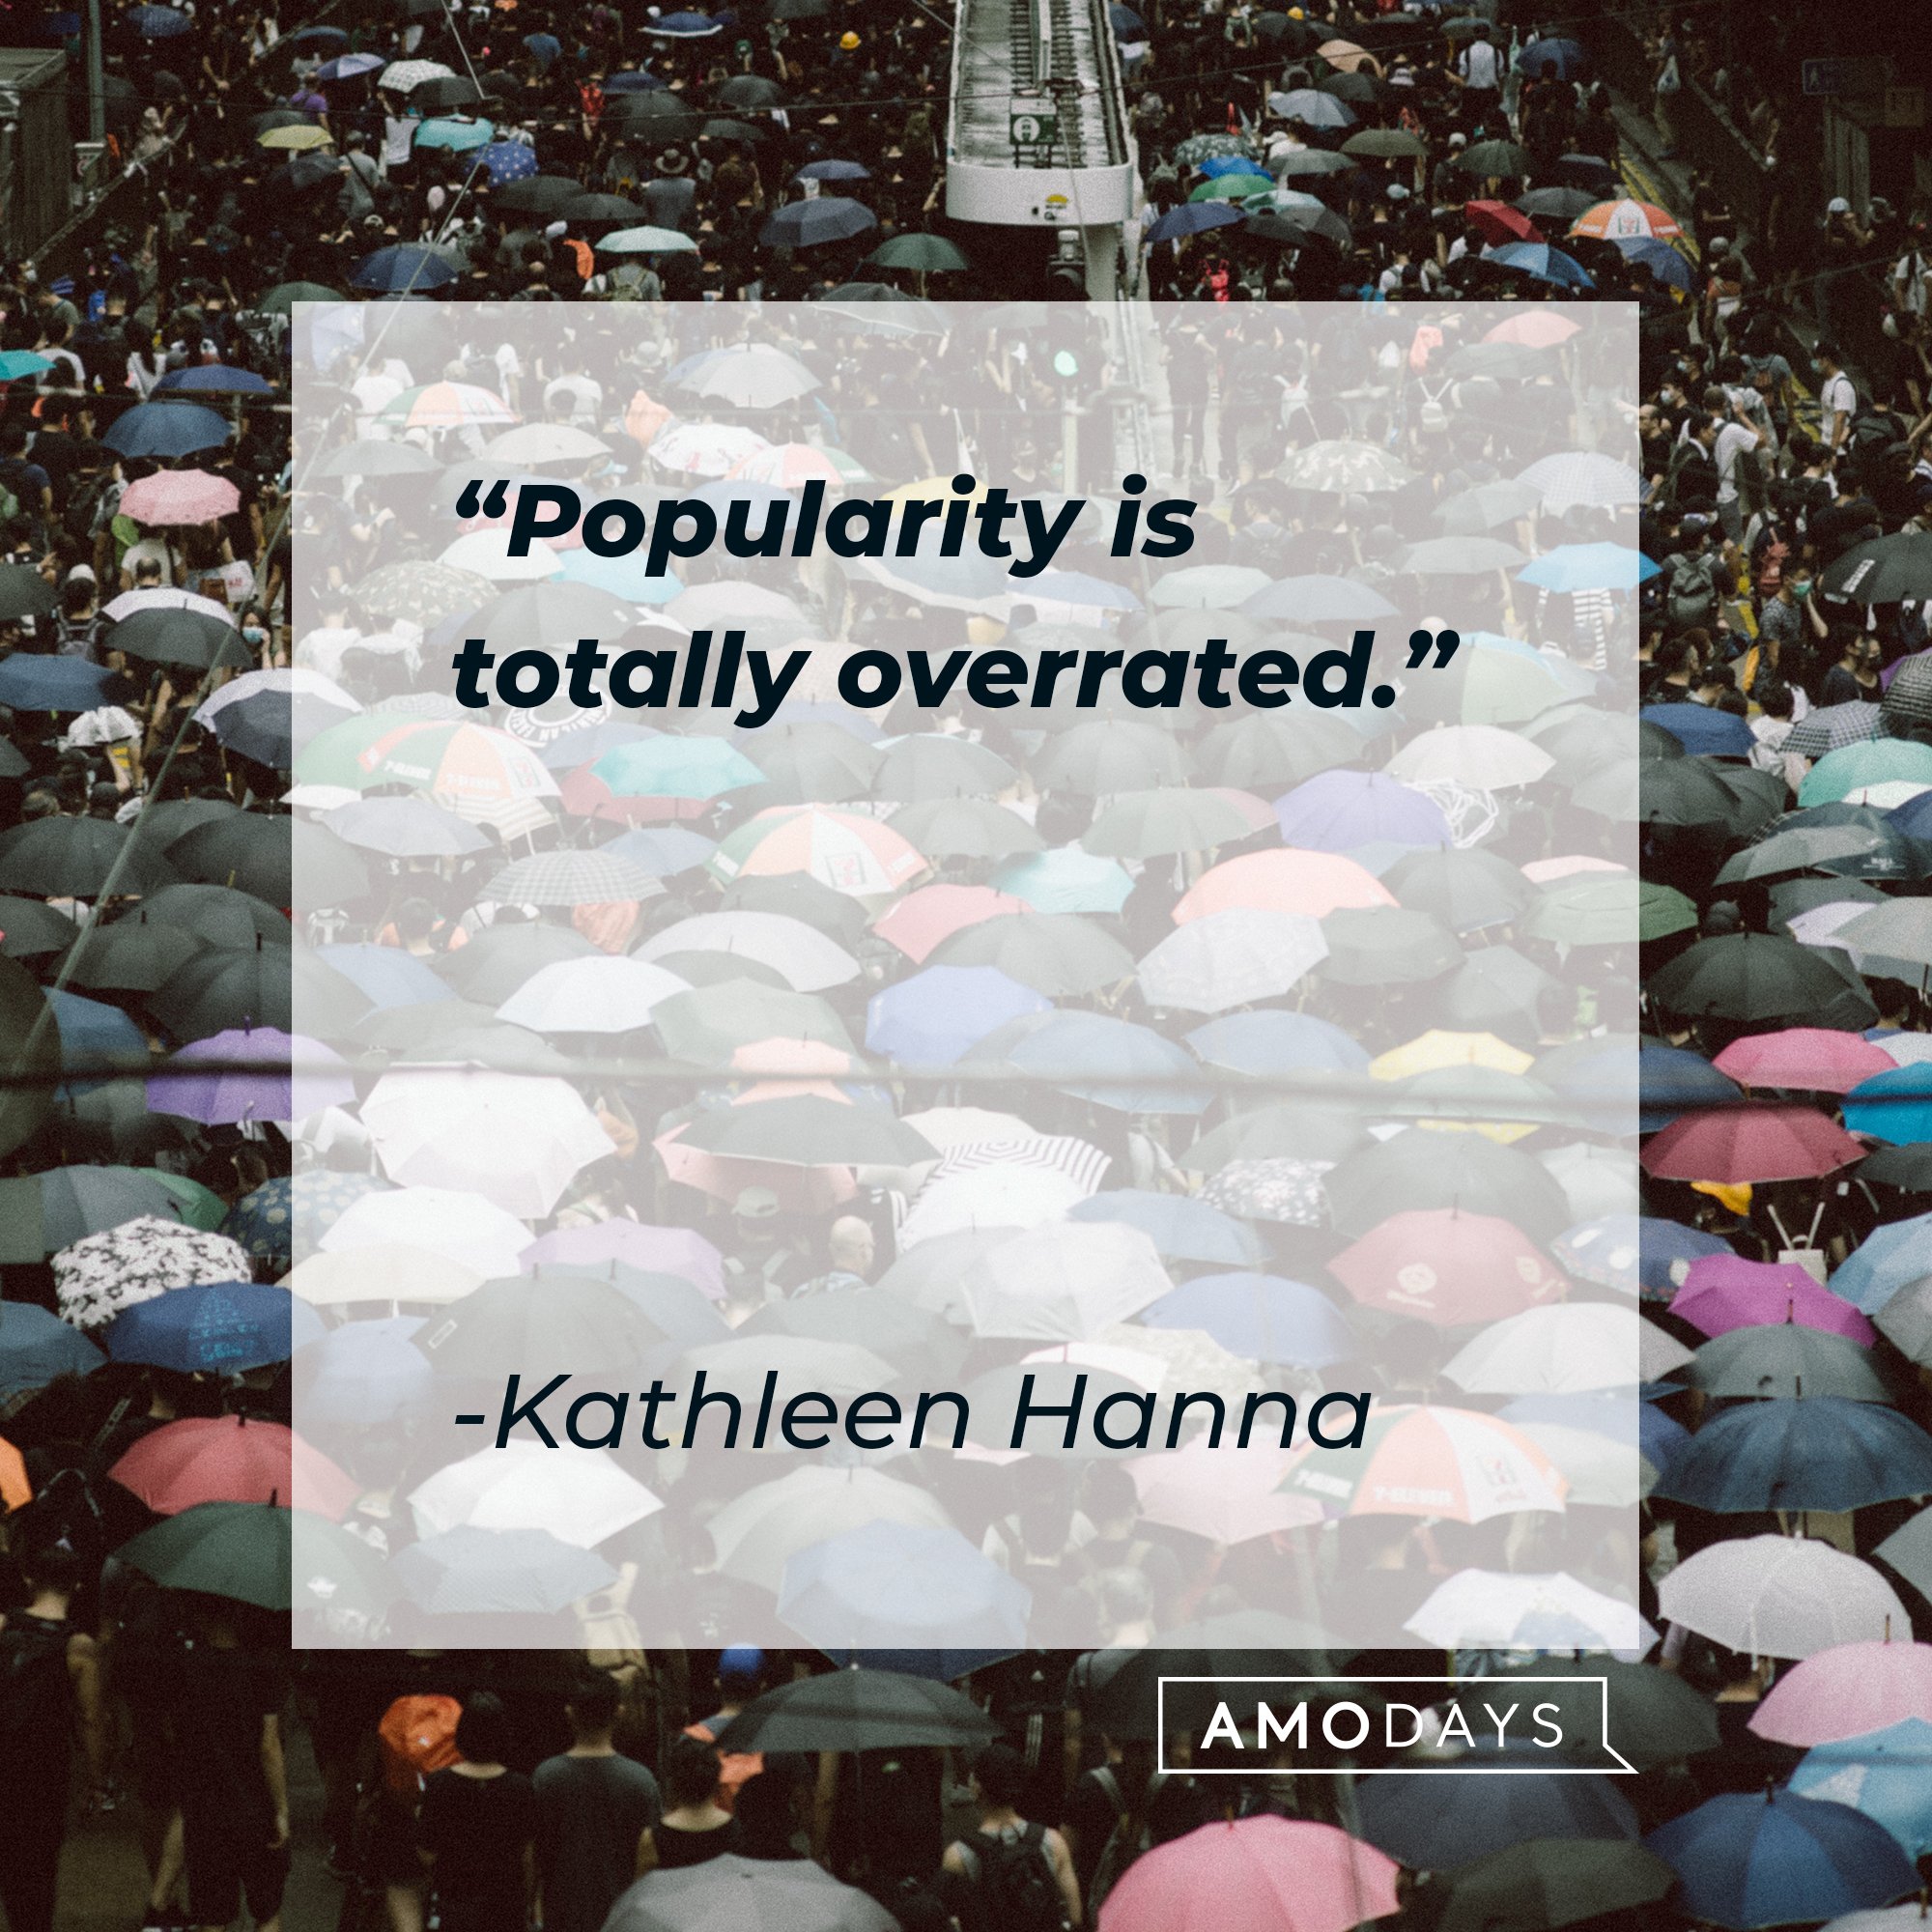 Kathleen Hanna’s quote: "Popularity is totally overrated." | Image: AmoDays